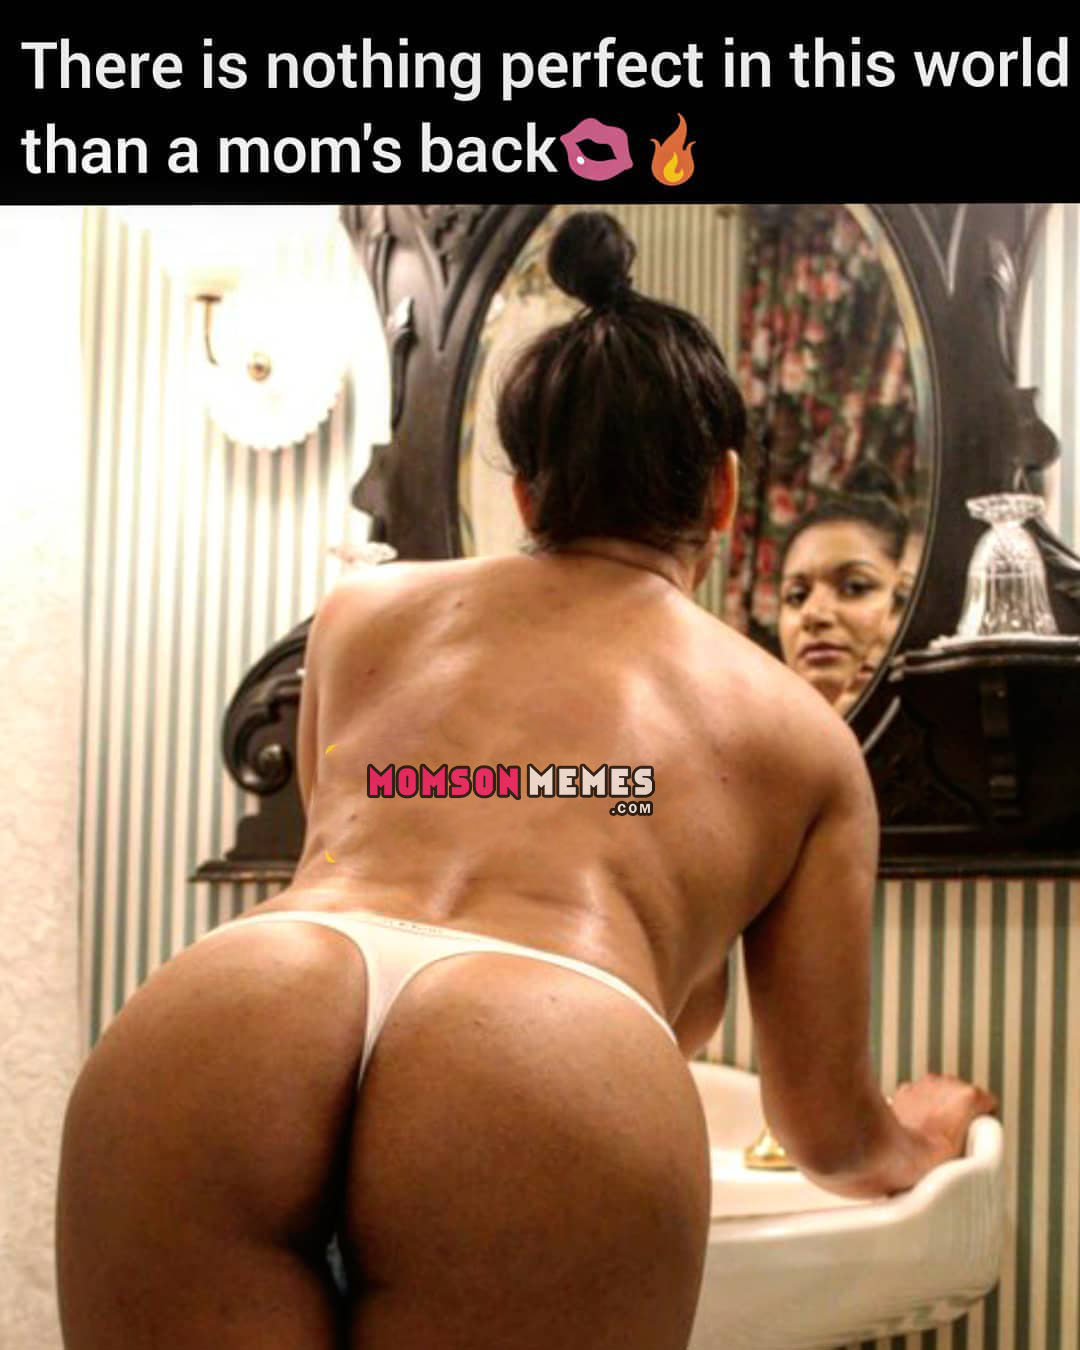 There is nothing perfect like mom’s ass!